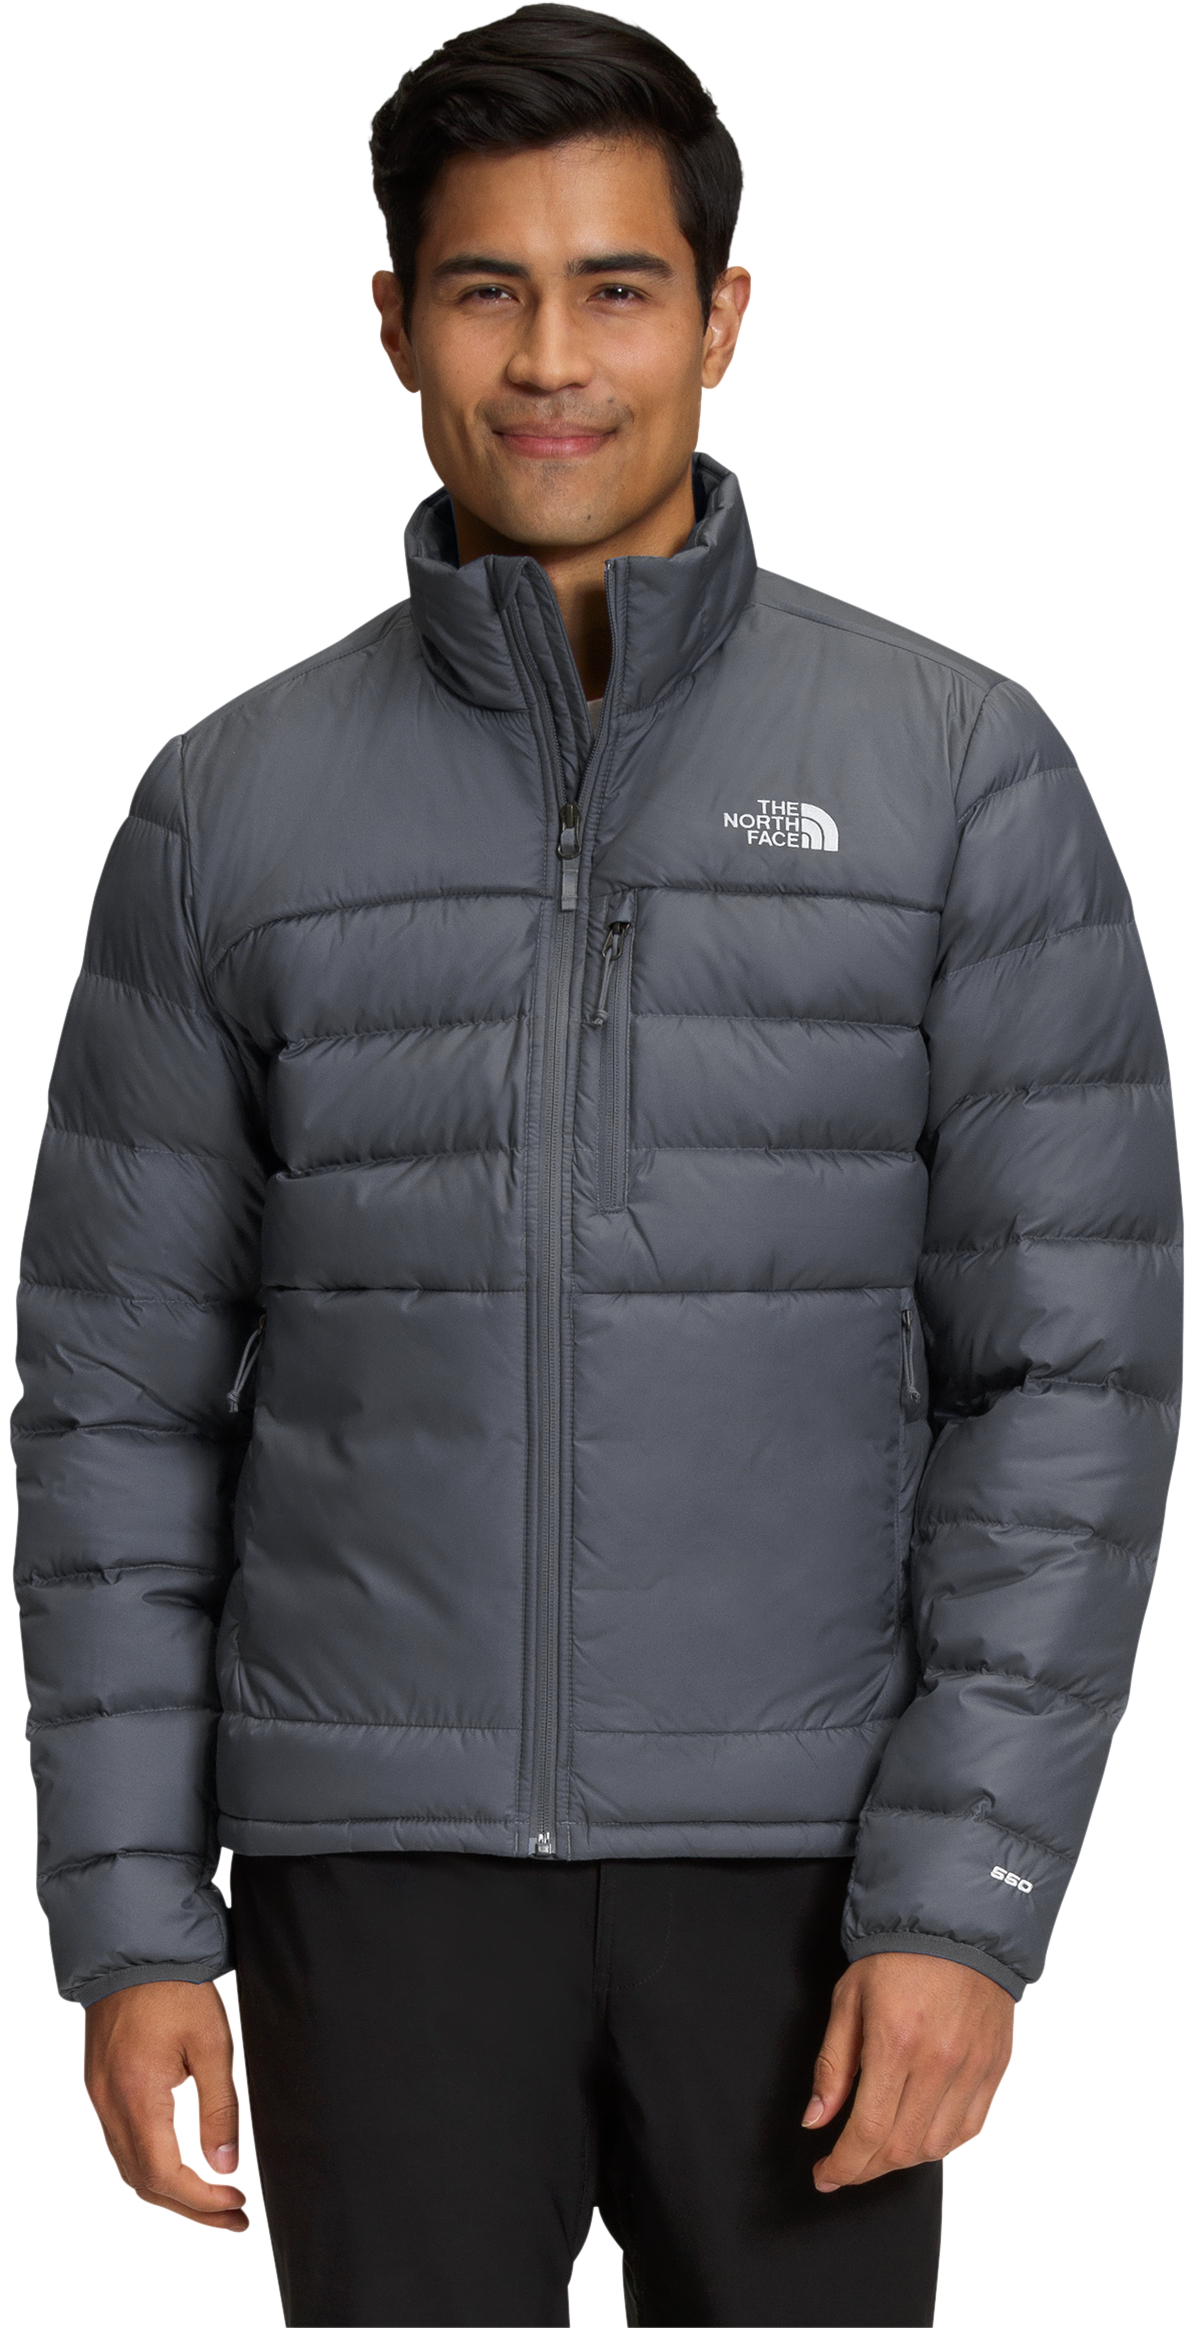 The North Face Aconcagua 2 Jacket for Men